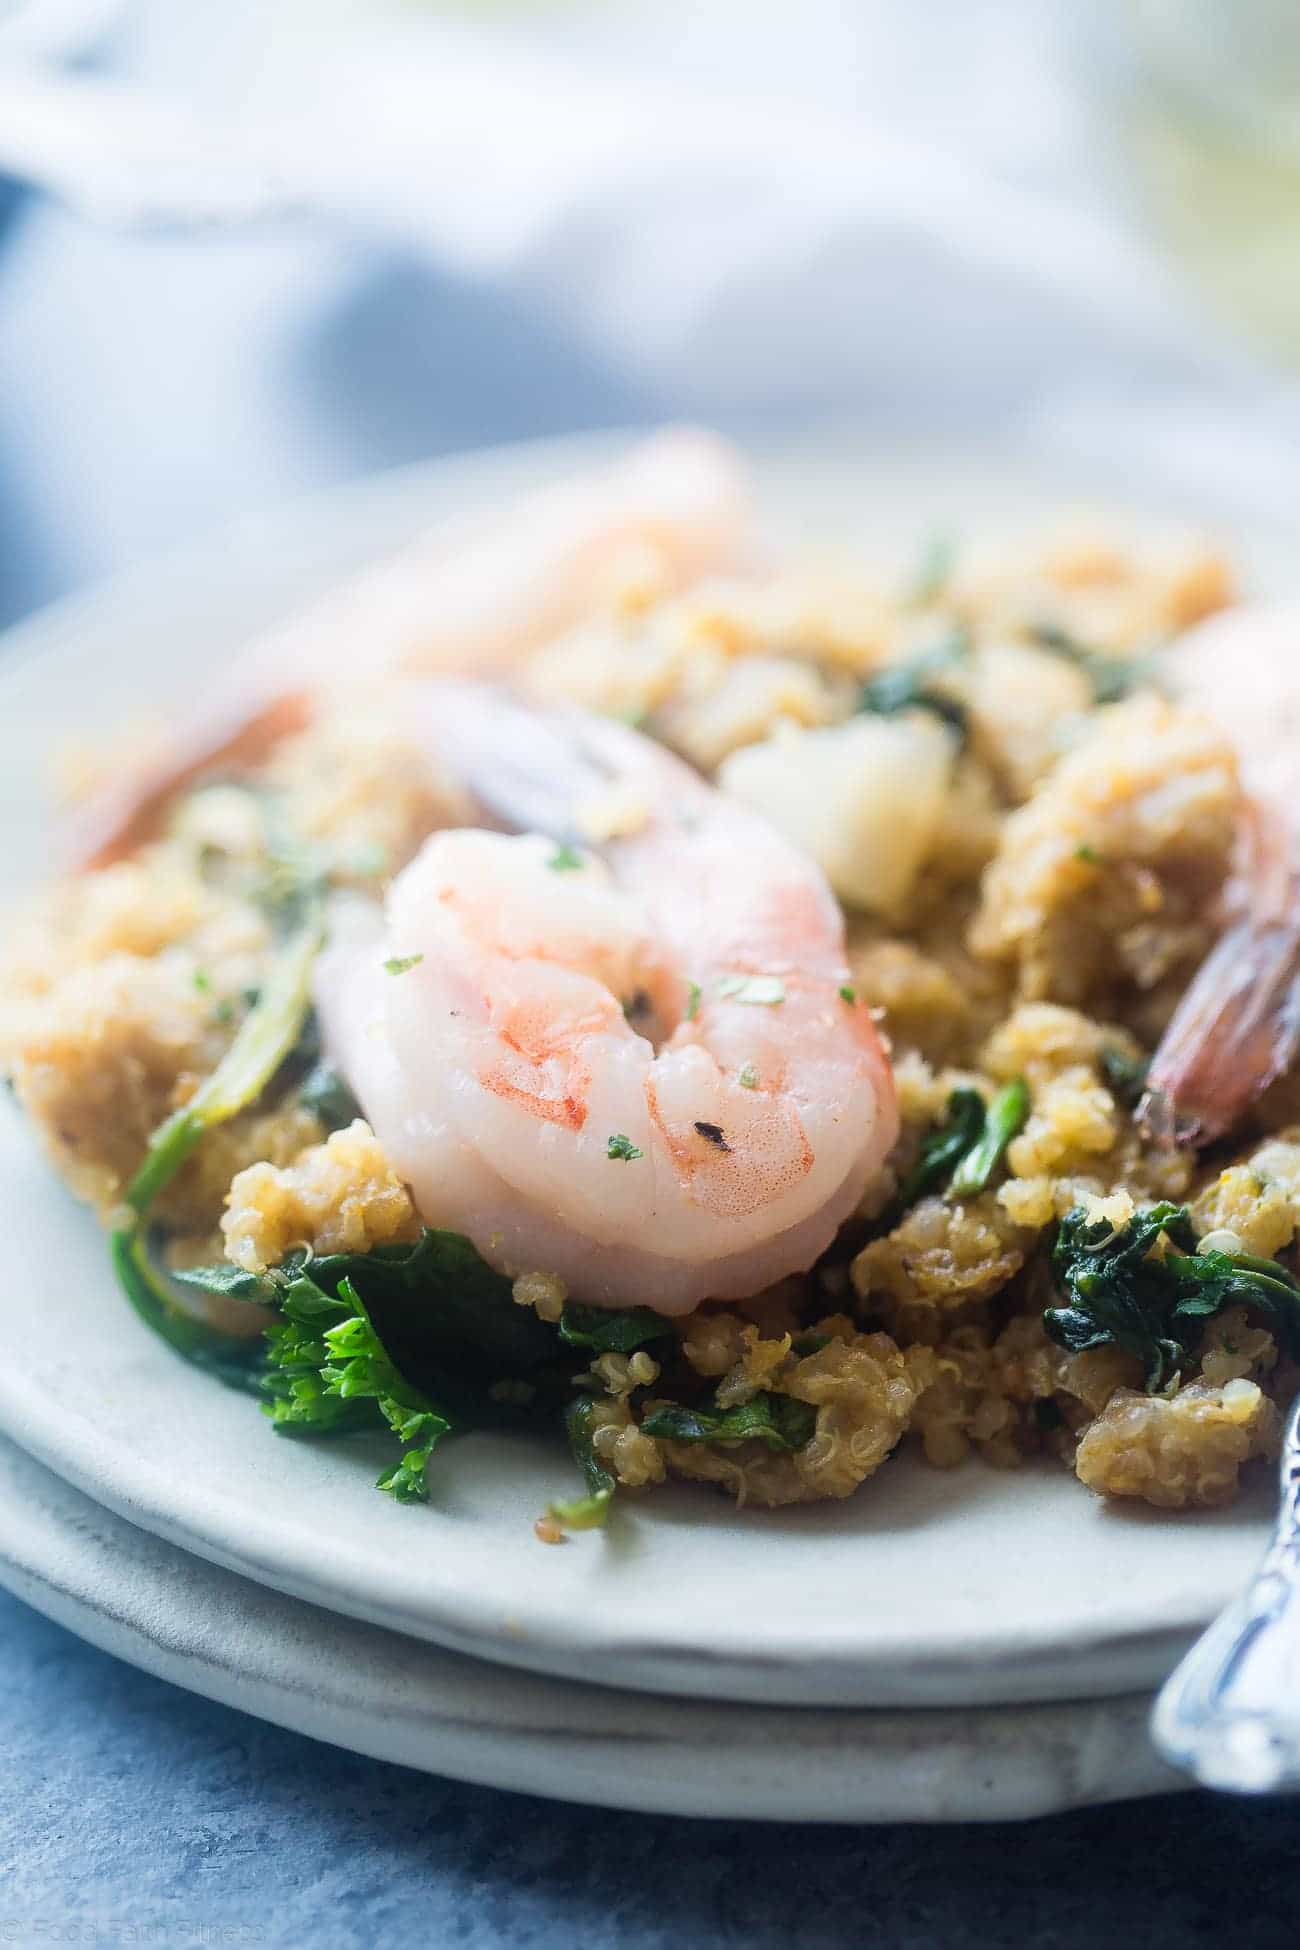 Slow Cooker Garlic Butter Shrimp and Quinoa - This easy, 7 ingredient weeknight dinner is made in the slow cooker! It's a healthy, sugar free and protein packed meal that the whole family will love! | Foodfaithfitness.com | @FoodFaithFit